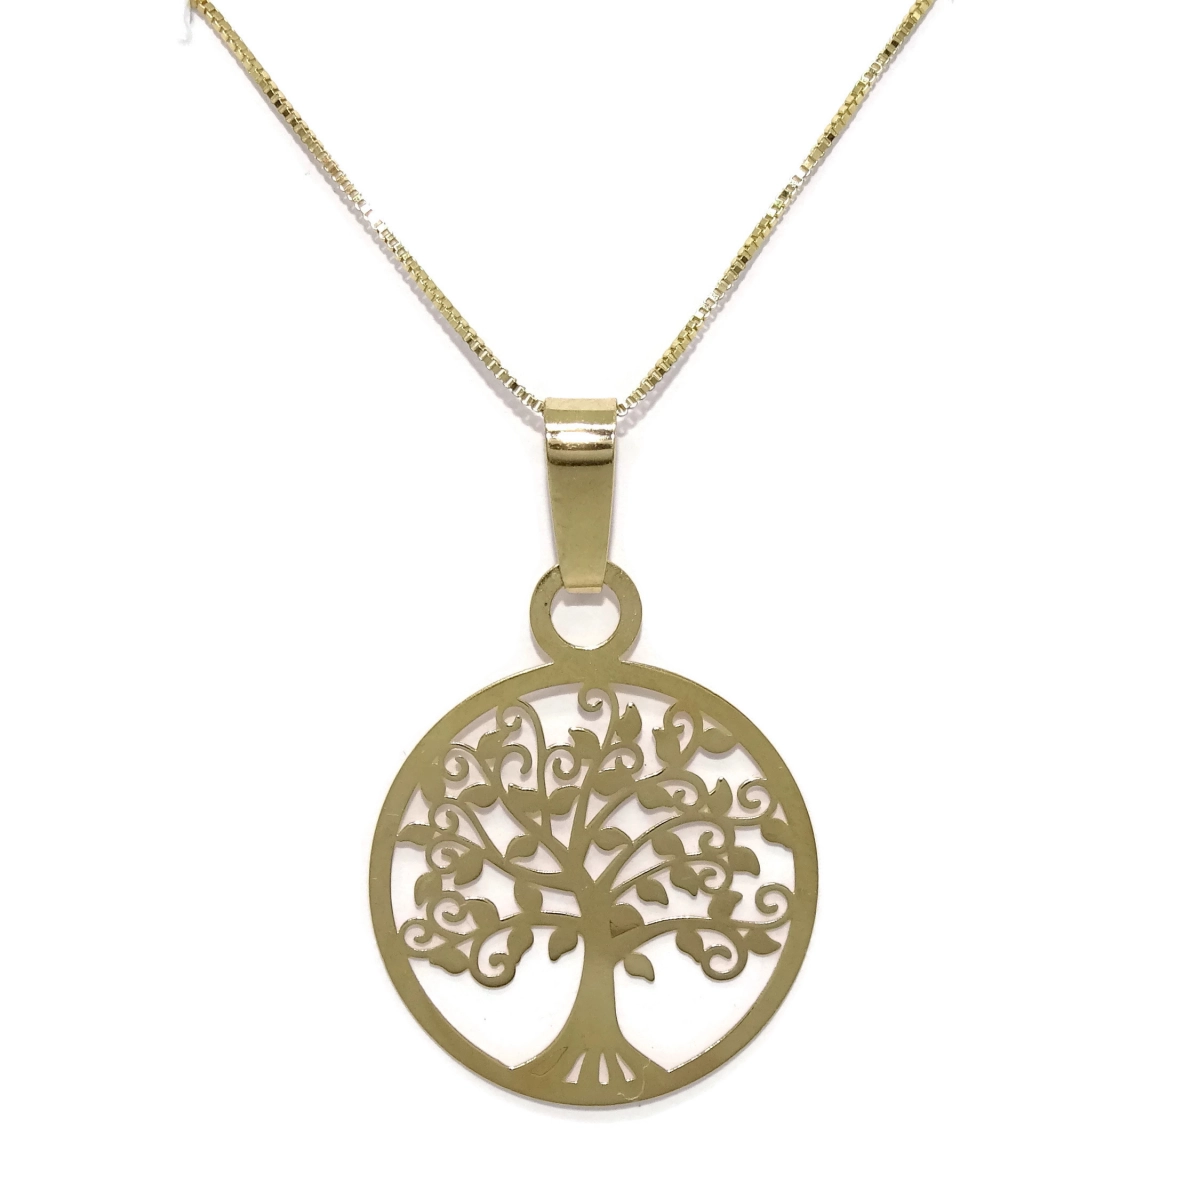 NECKLACE OF 18K YELLOW GOLD WITH �BOL OF THE LIFE OF 2.00 CM DI�METRO AND STRING VENETIAN 40CM. NEVER SAY NEVER